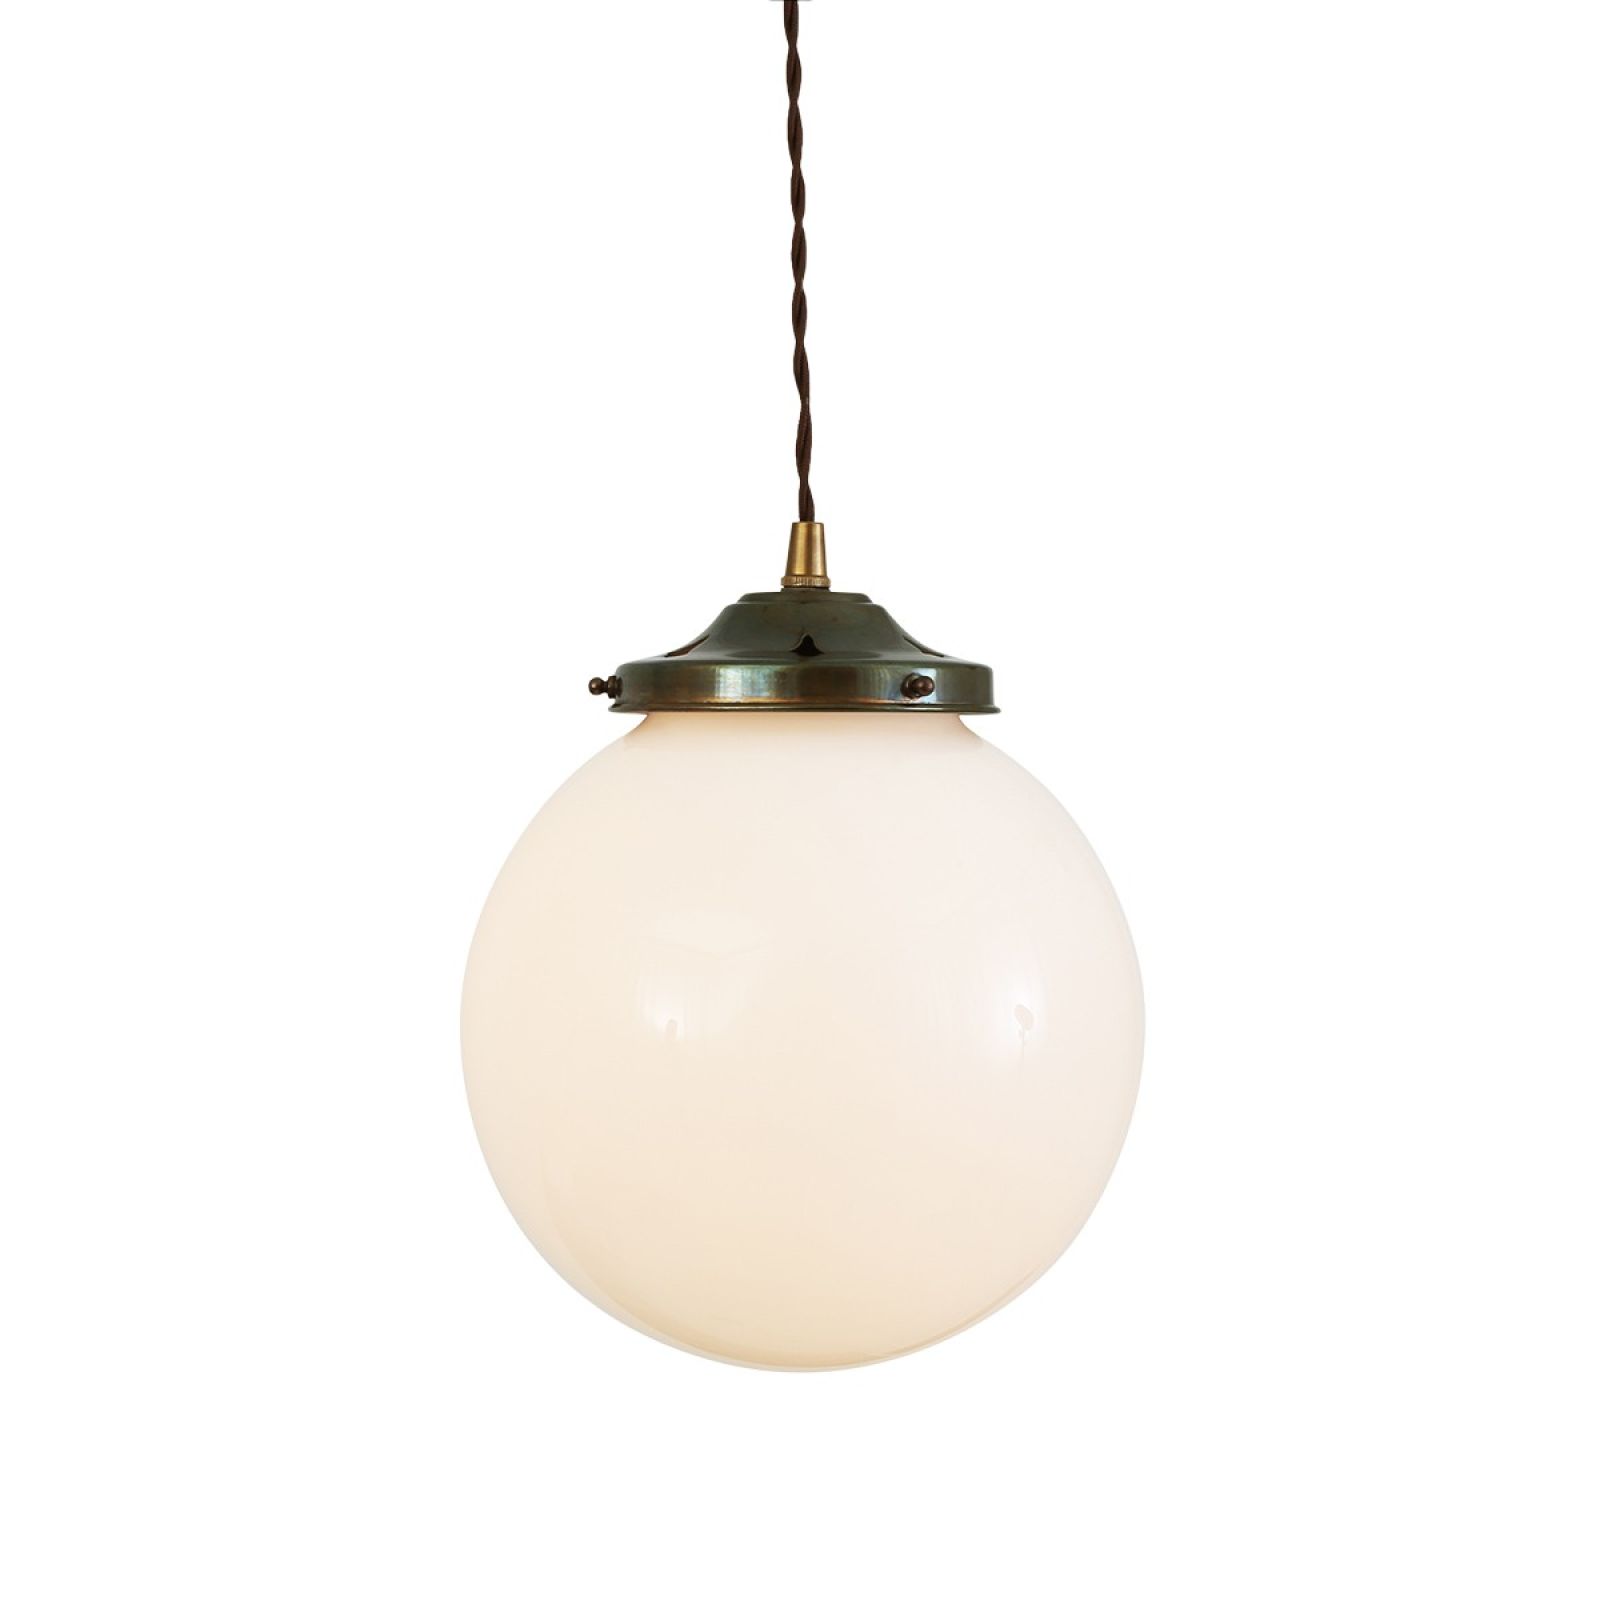 Simple Opal Globe Pendant Light - choice of sizes and finishes